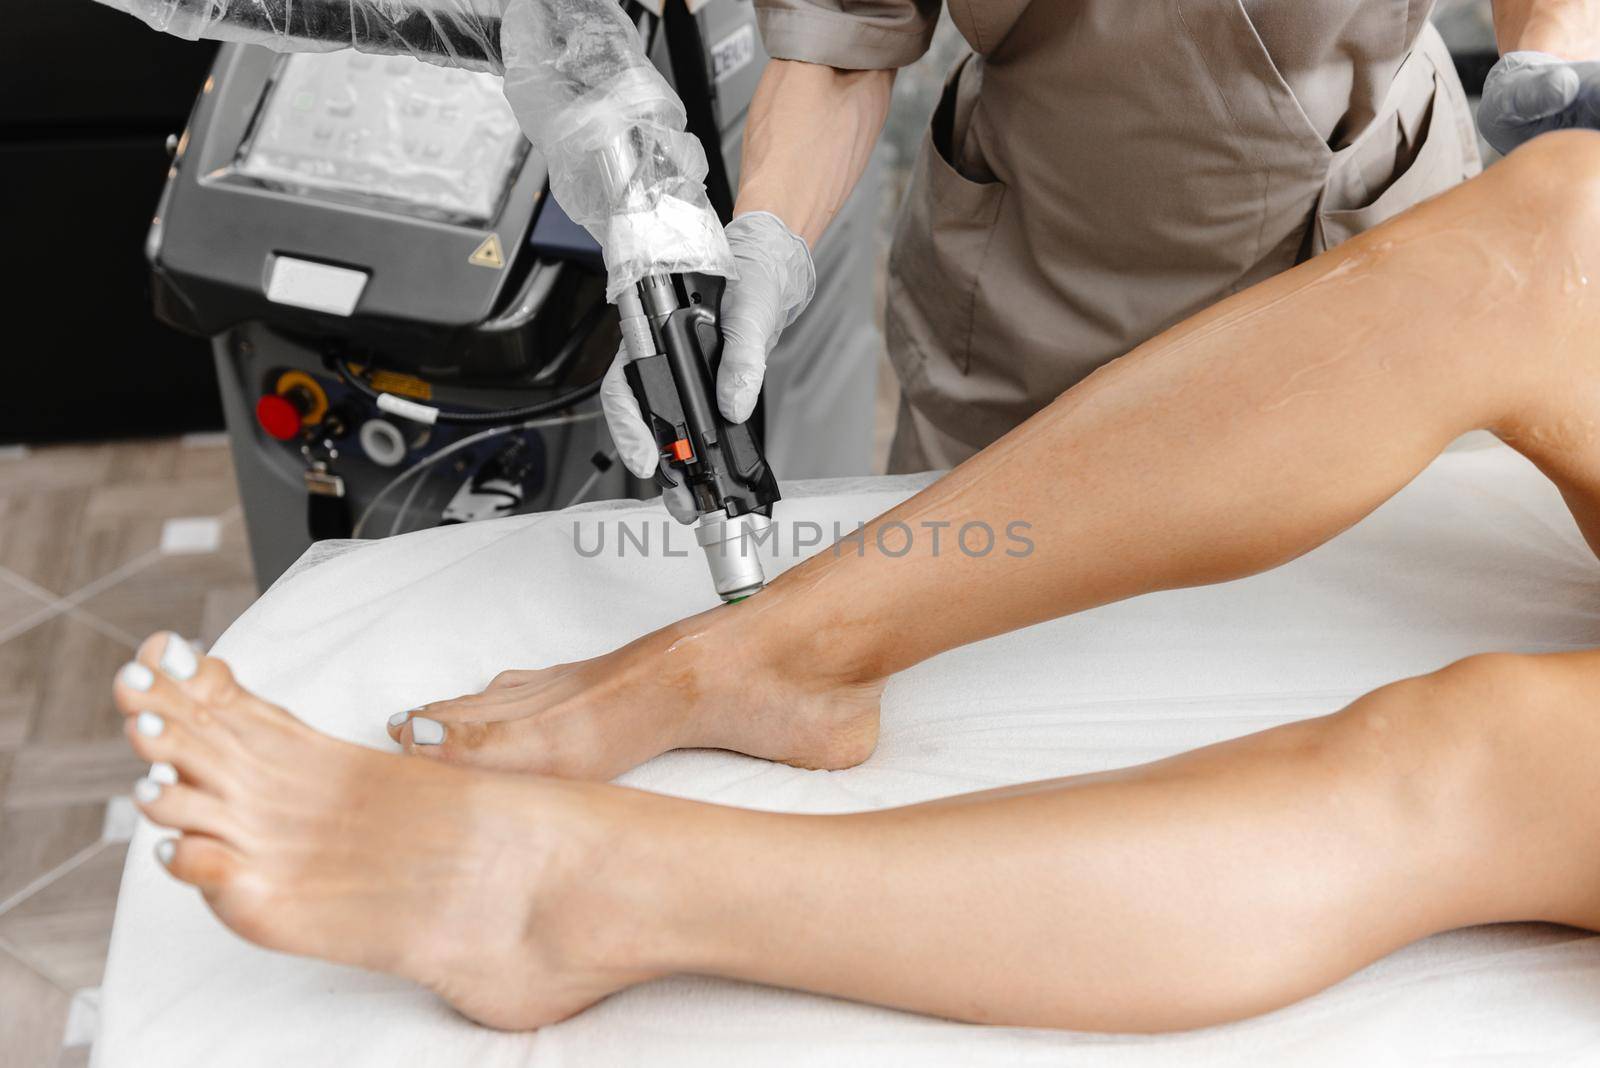 the process of laser hair removal of legs in a large palm. Hair removal with laser